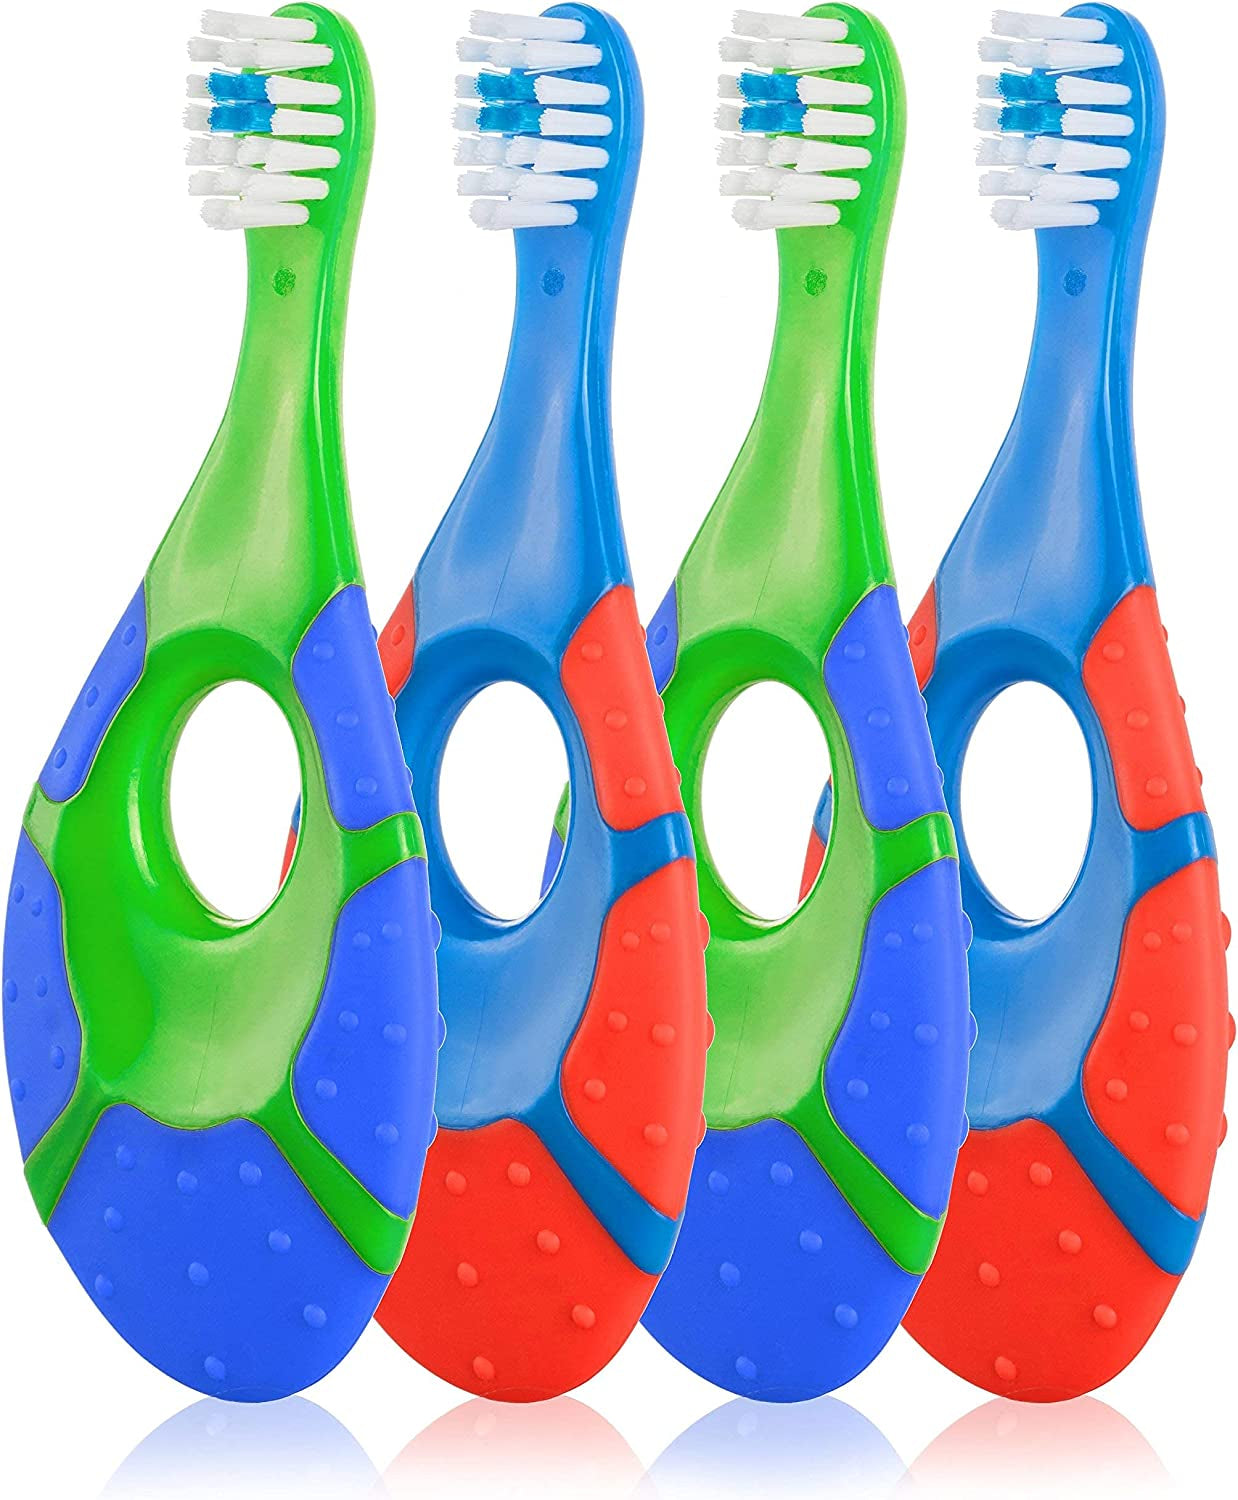 "Gentlecare Toddler Toothbrush Set - 4-Pack, Extra Soft Bristles, BPA Free, Teething Relief, Ages 0-2 (Blue)"